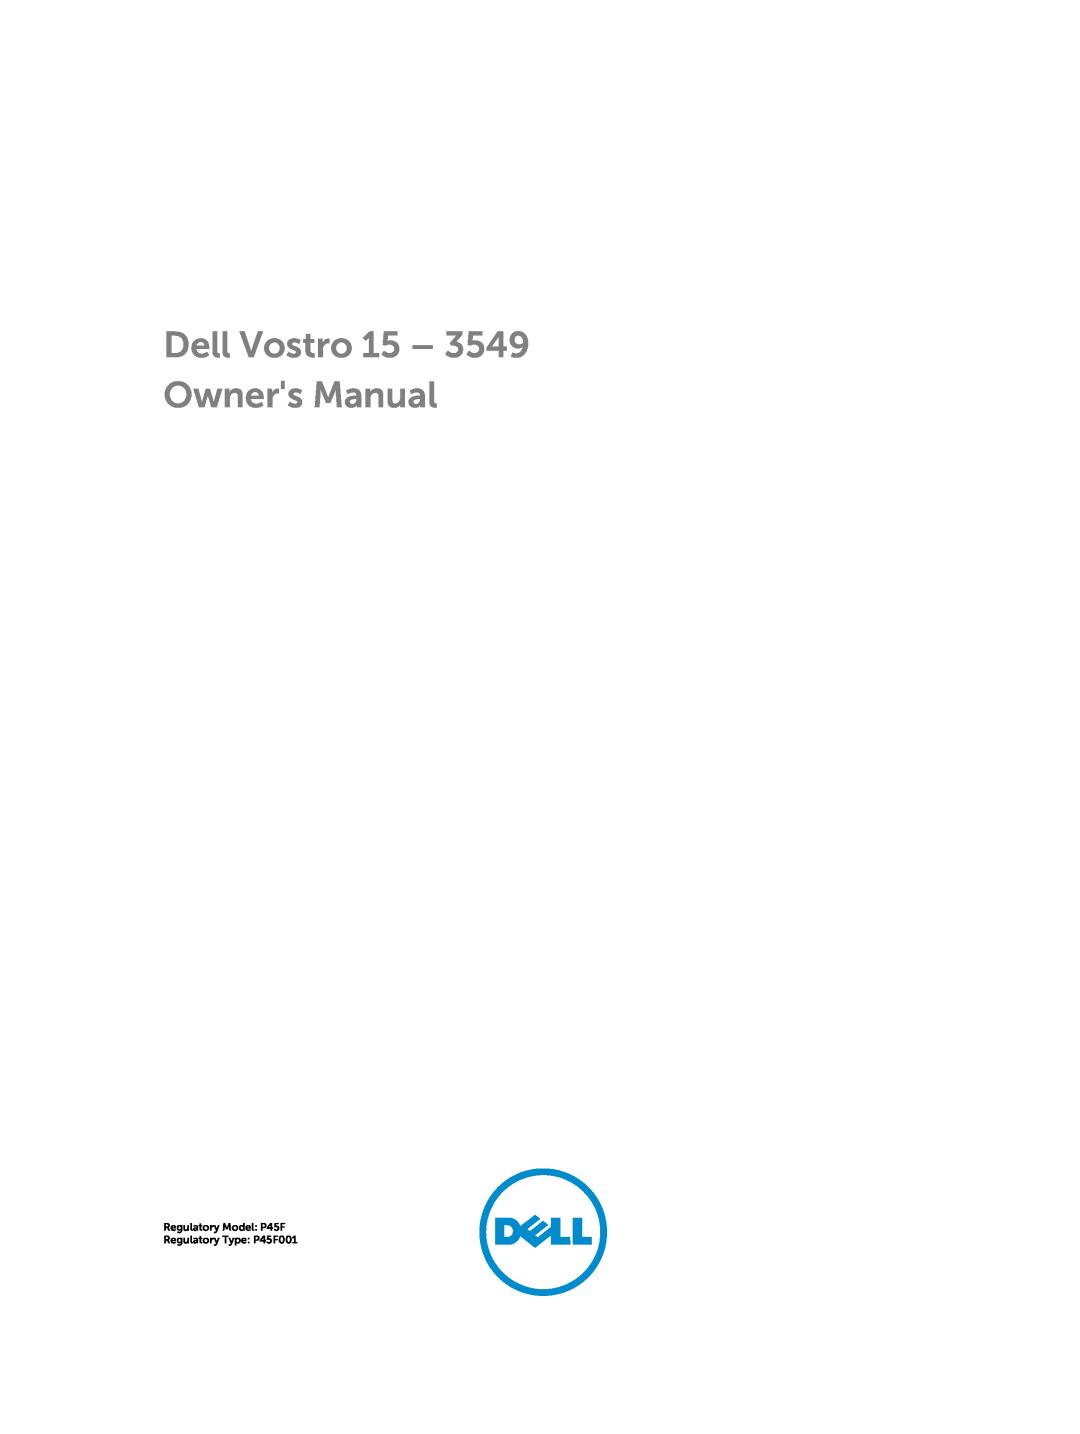 Dell 15  - 3549 owner manual Dell Vostro 15 Owners Manual, Regulatory Model P45F Regulatory Type P45F001 